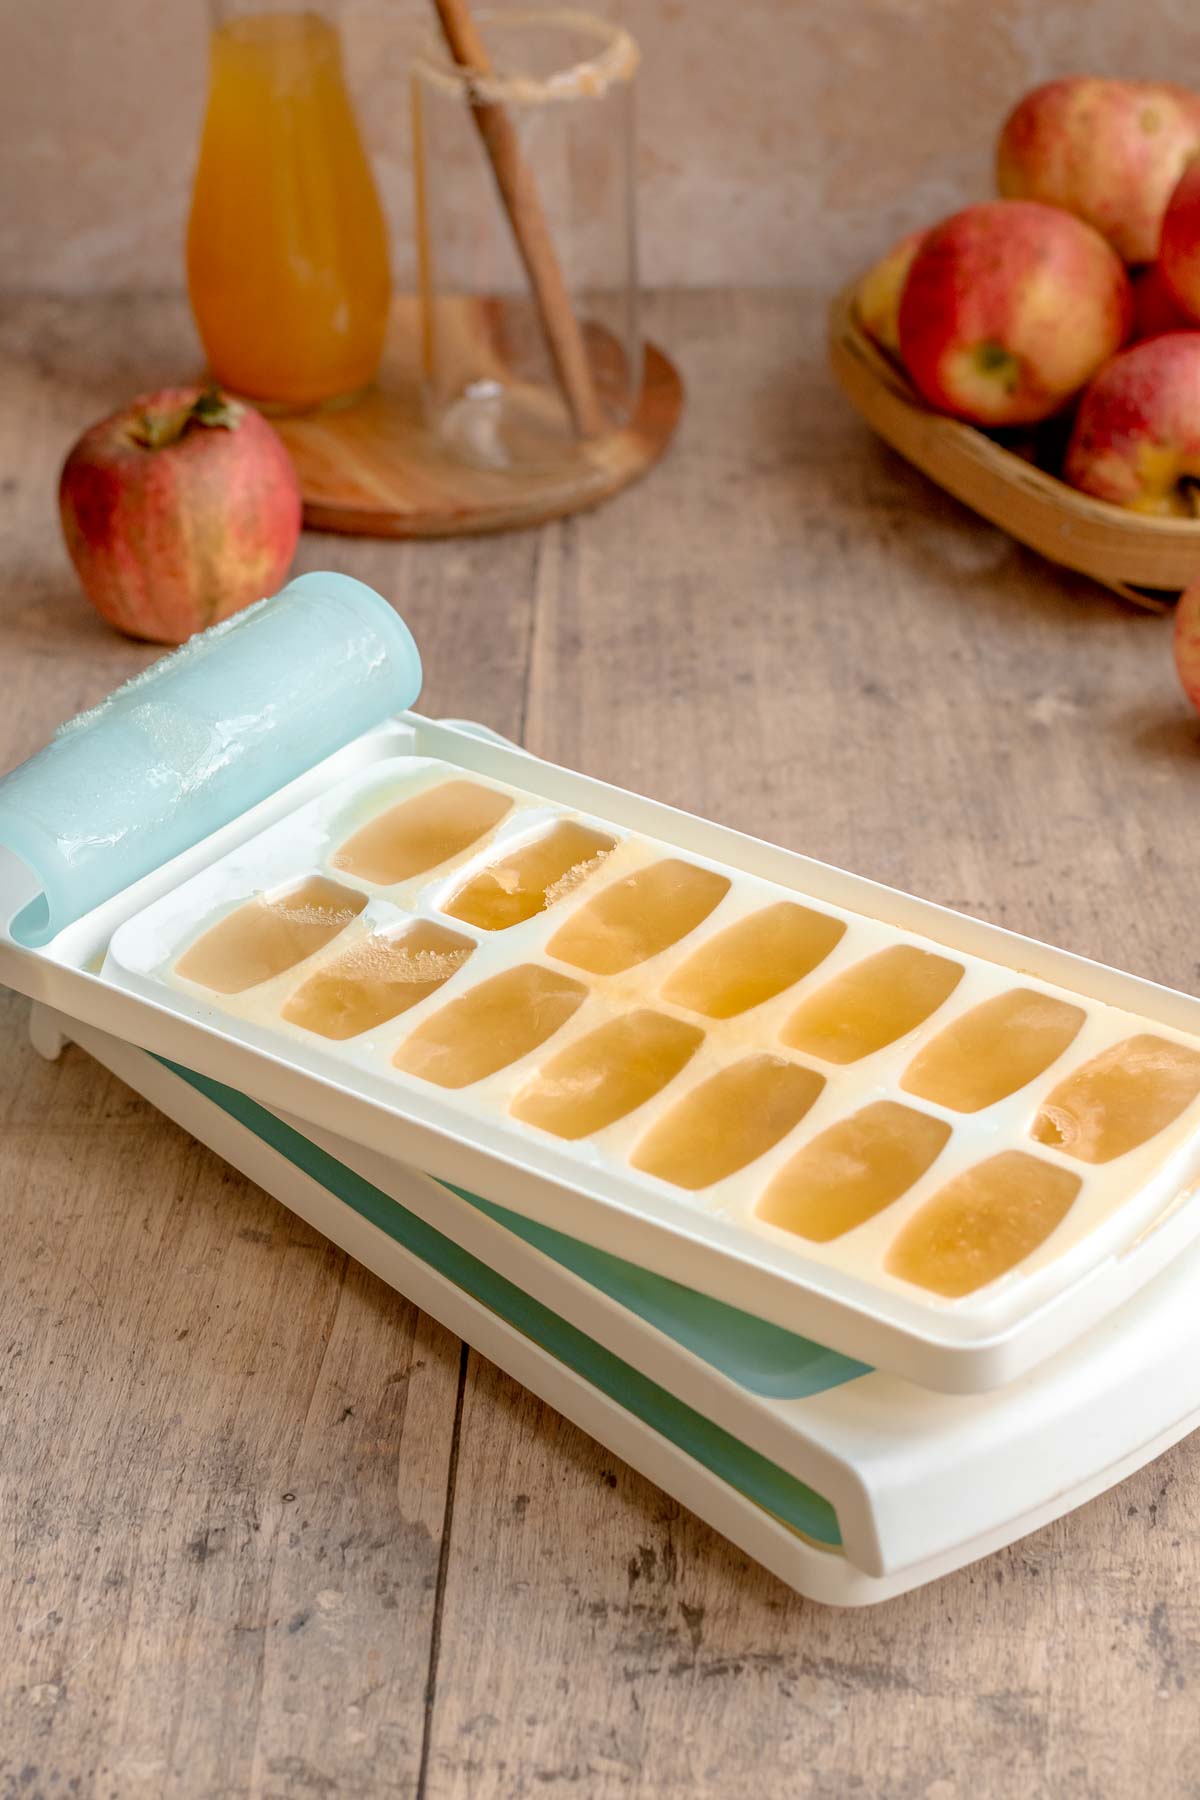 Apple cider frozen in ice cube trays.